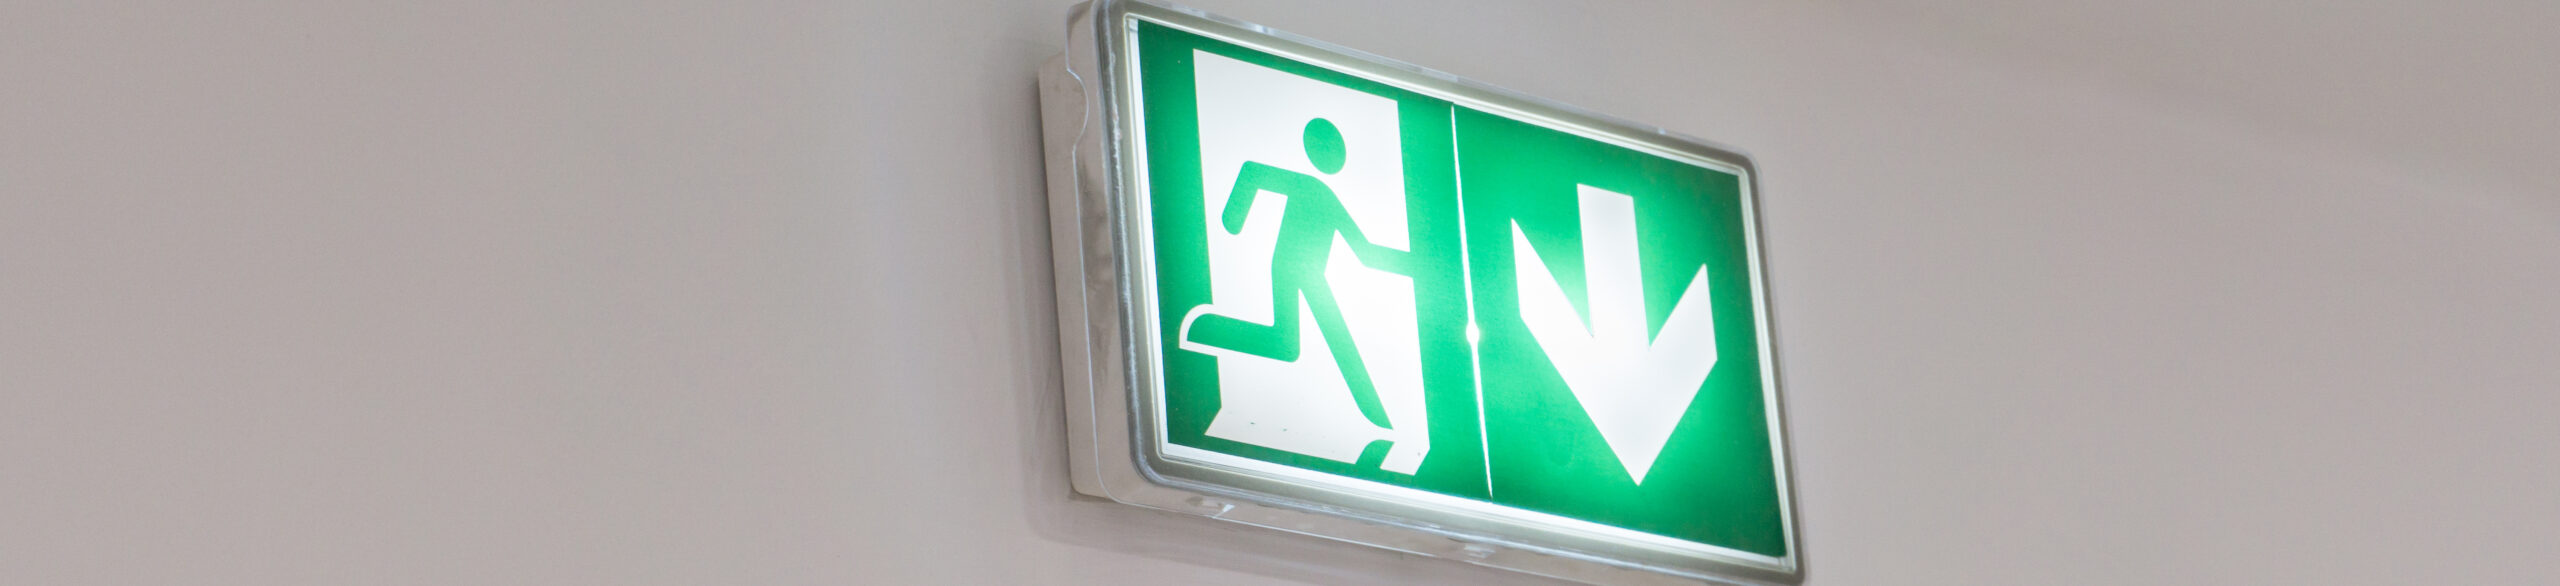 Emergency exit sign in a building glowing green